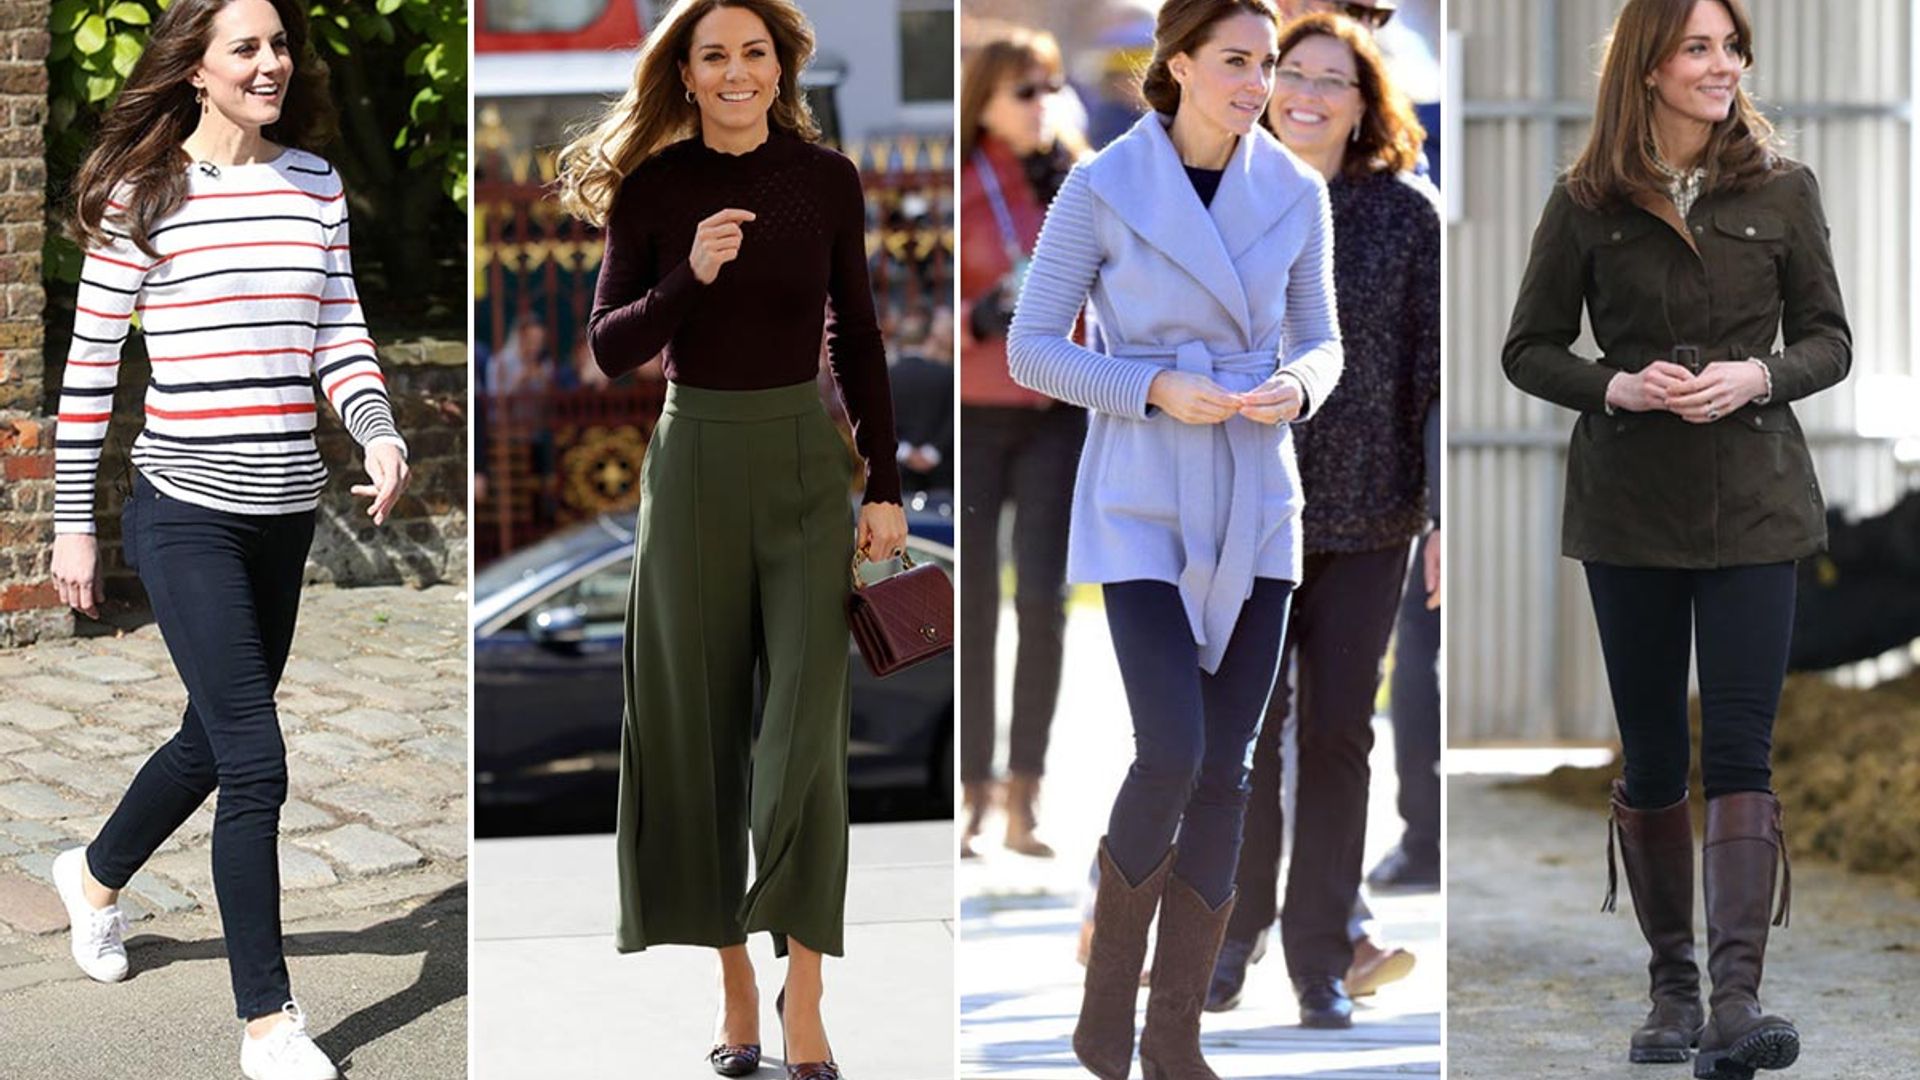 Kate Middleton Jeans and Pants Outfits - Kate Middleton's Casual